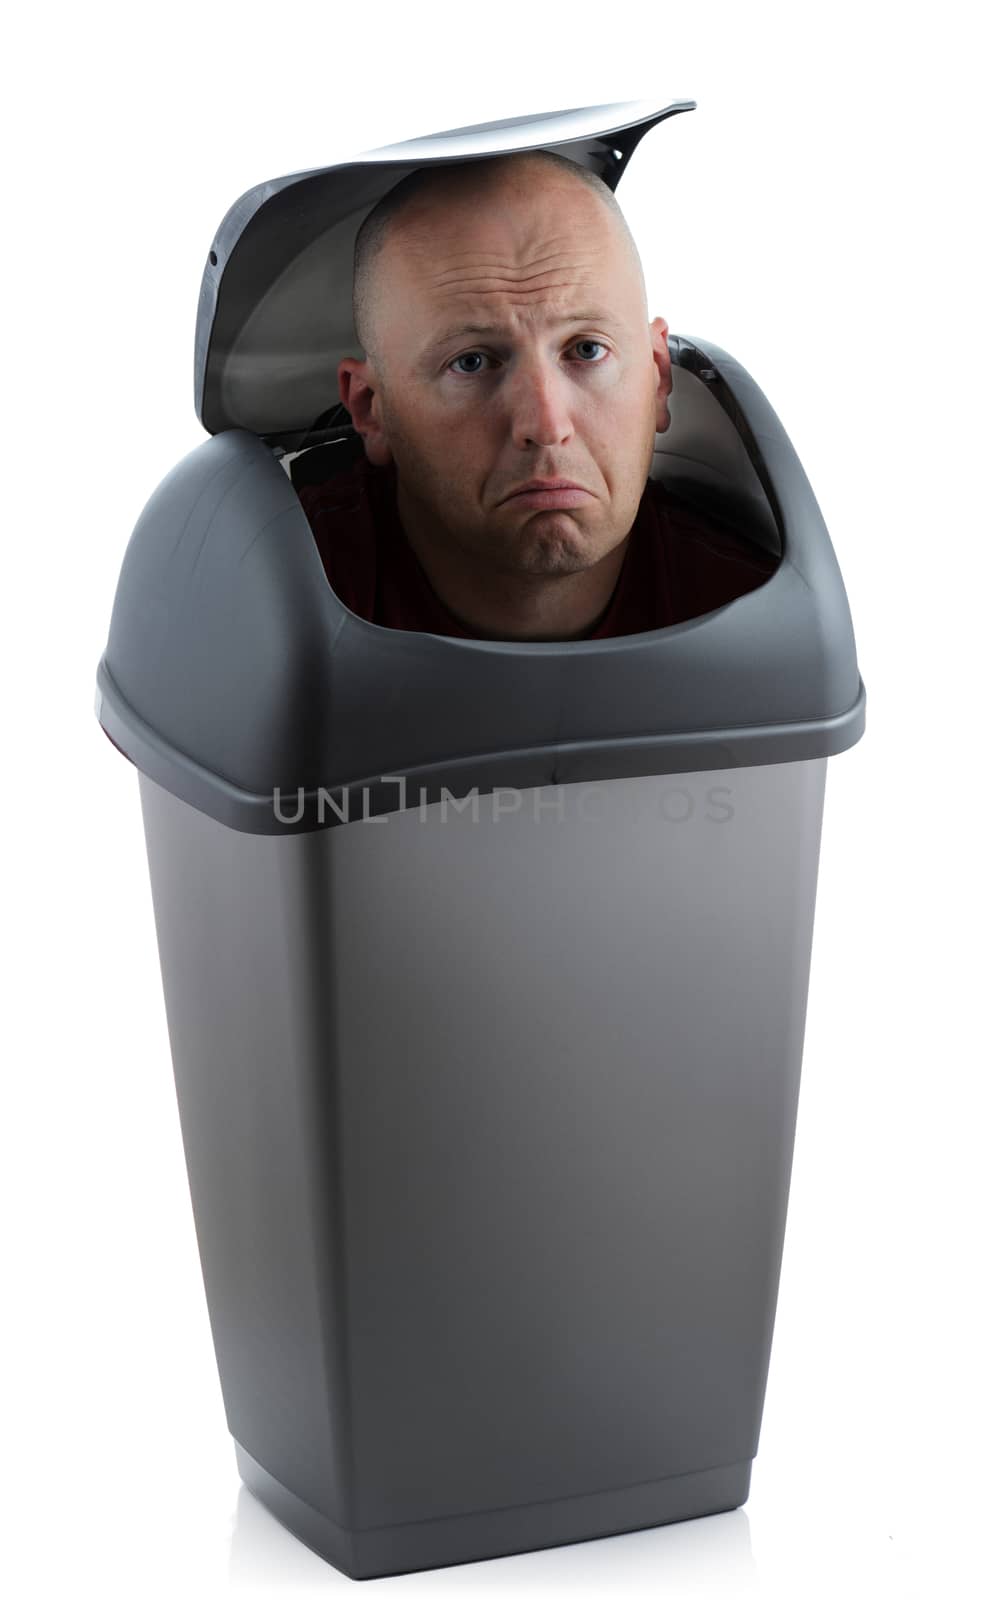 Man in a bin redundant not needed and sad